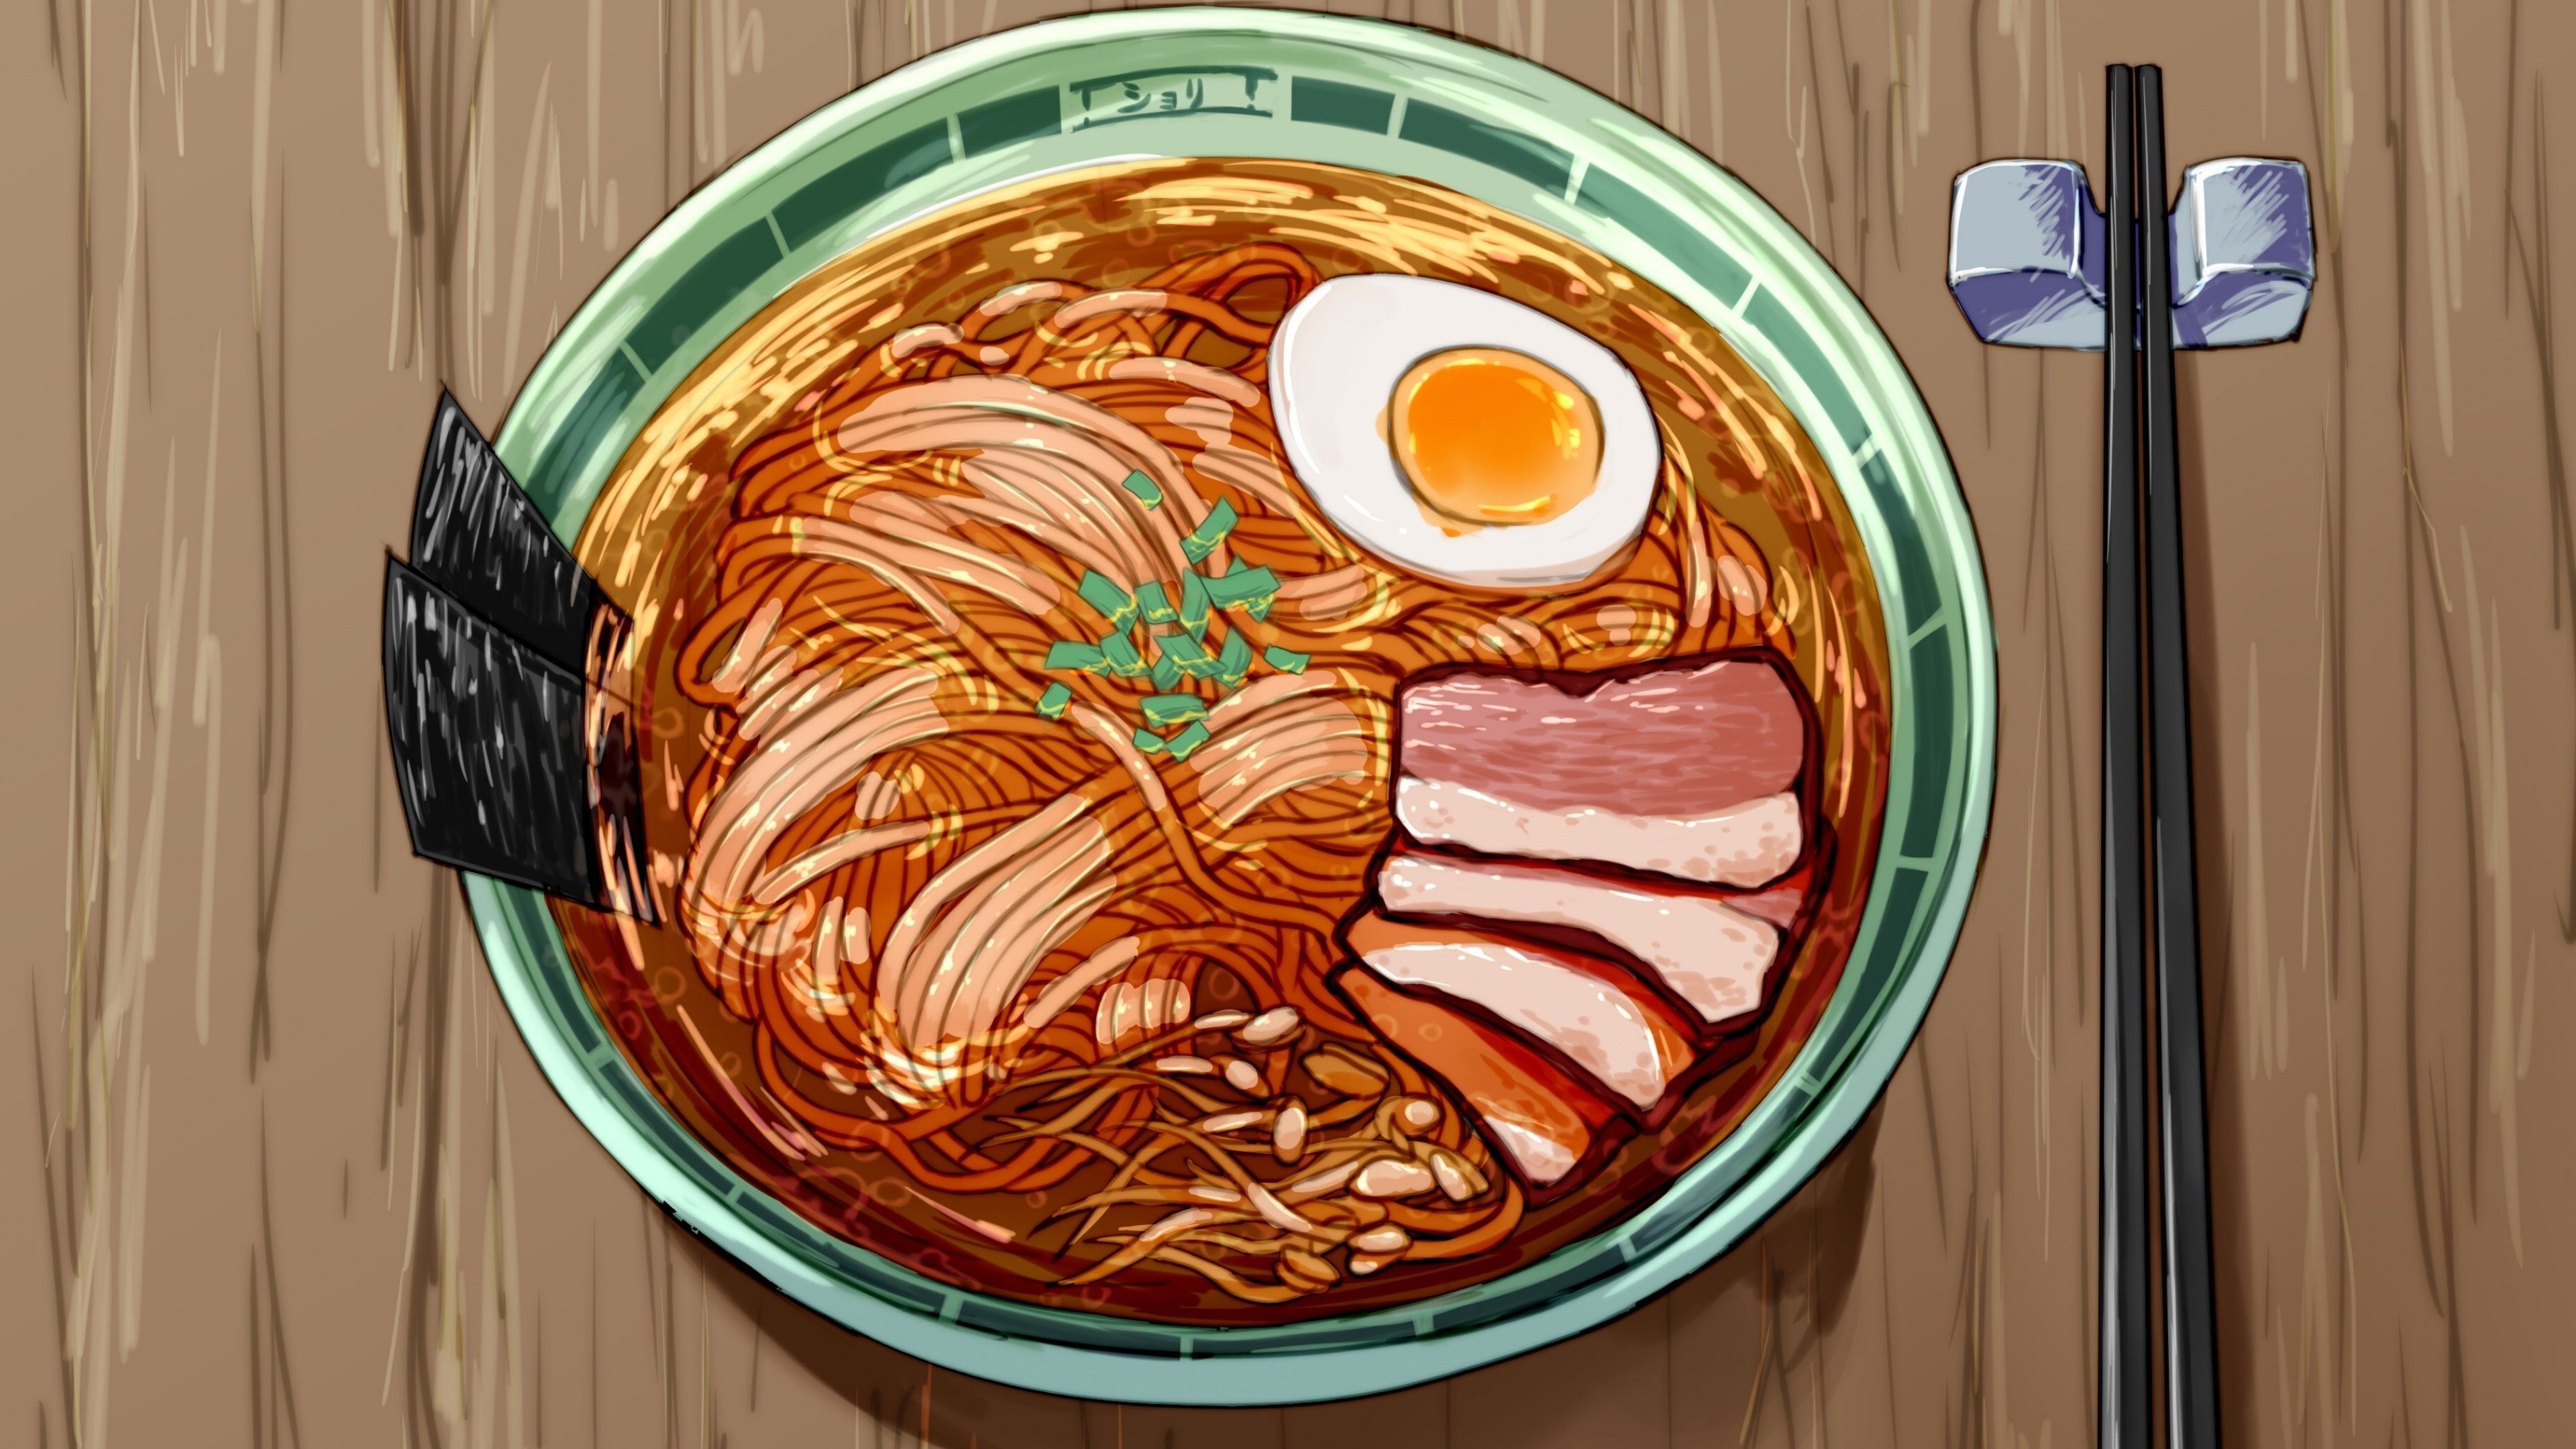 Ramen 4K wallpaper for your desktop or mobile screen free and easy to download